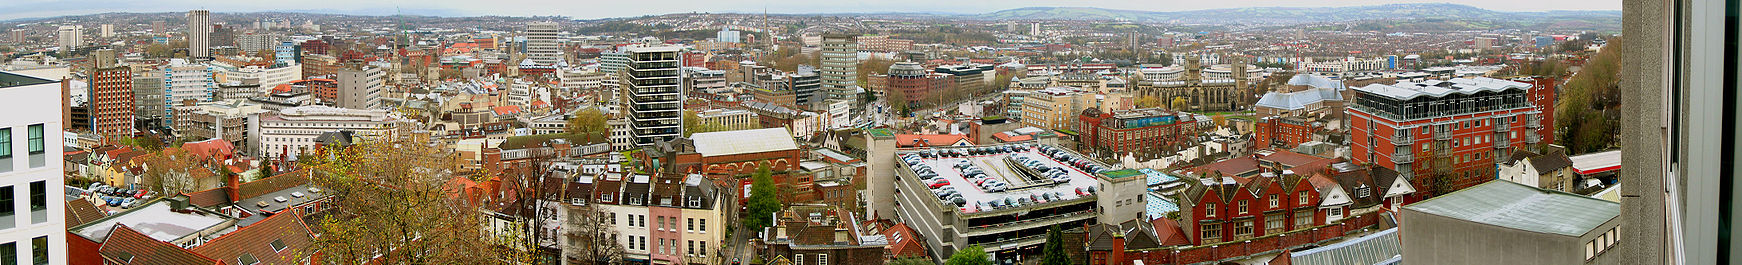 A panoramic view looking over a cityscape of office blocks, old buildings, church spires and a multi-story car park. In the distance hills.